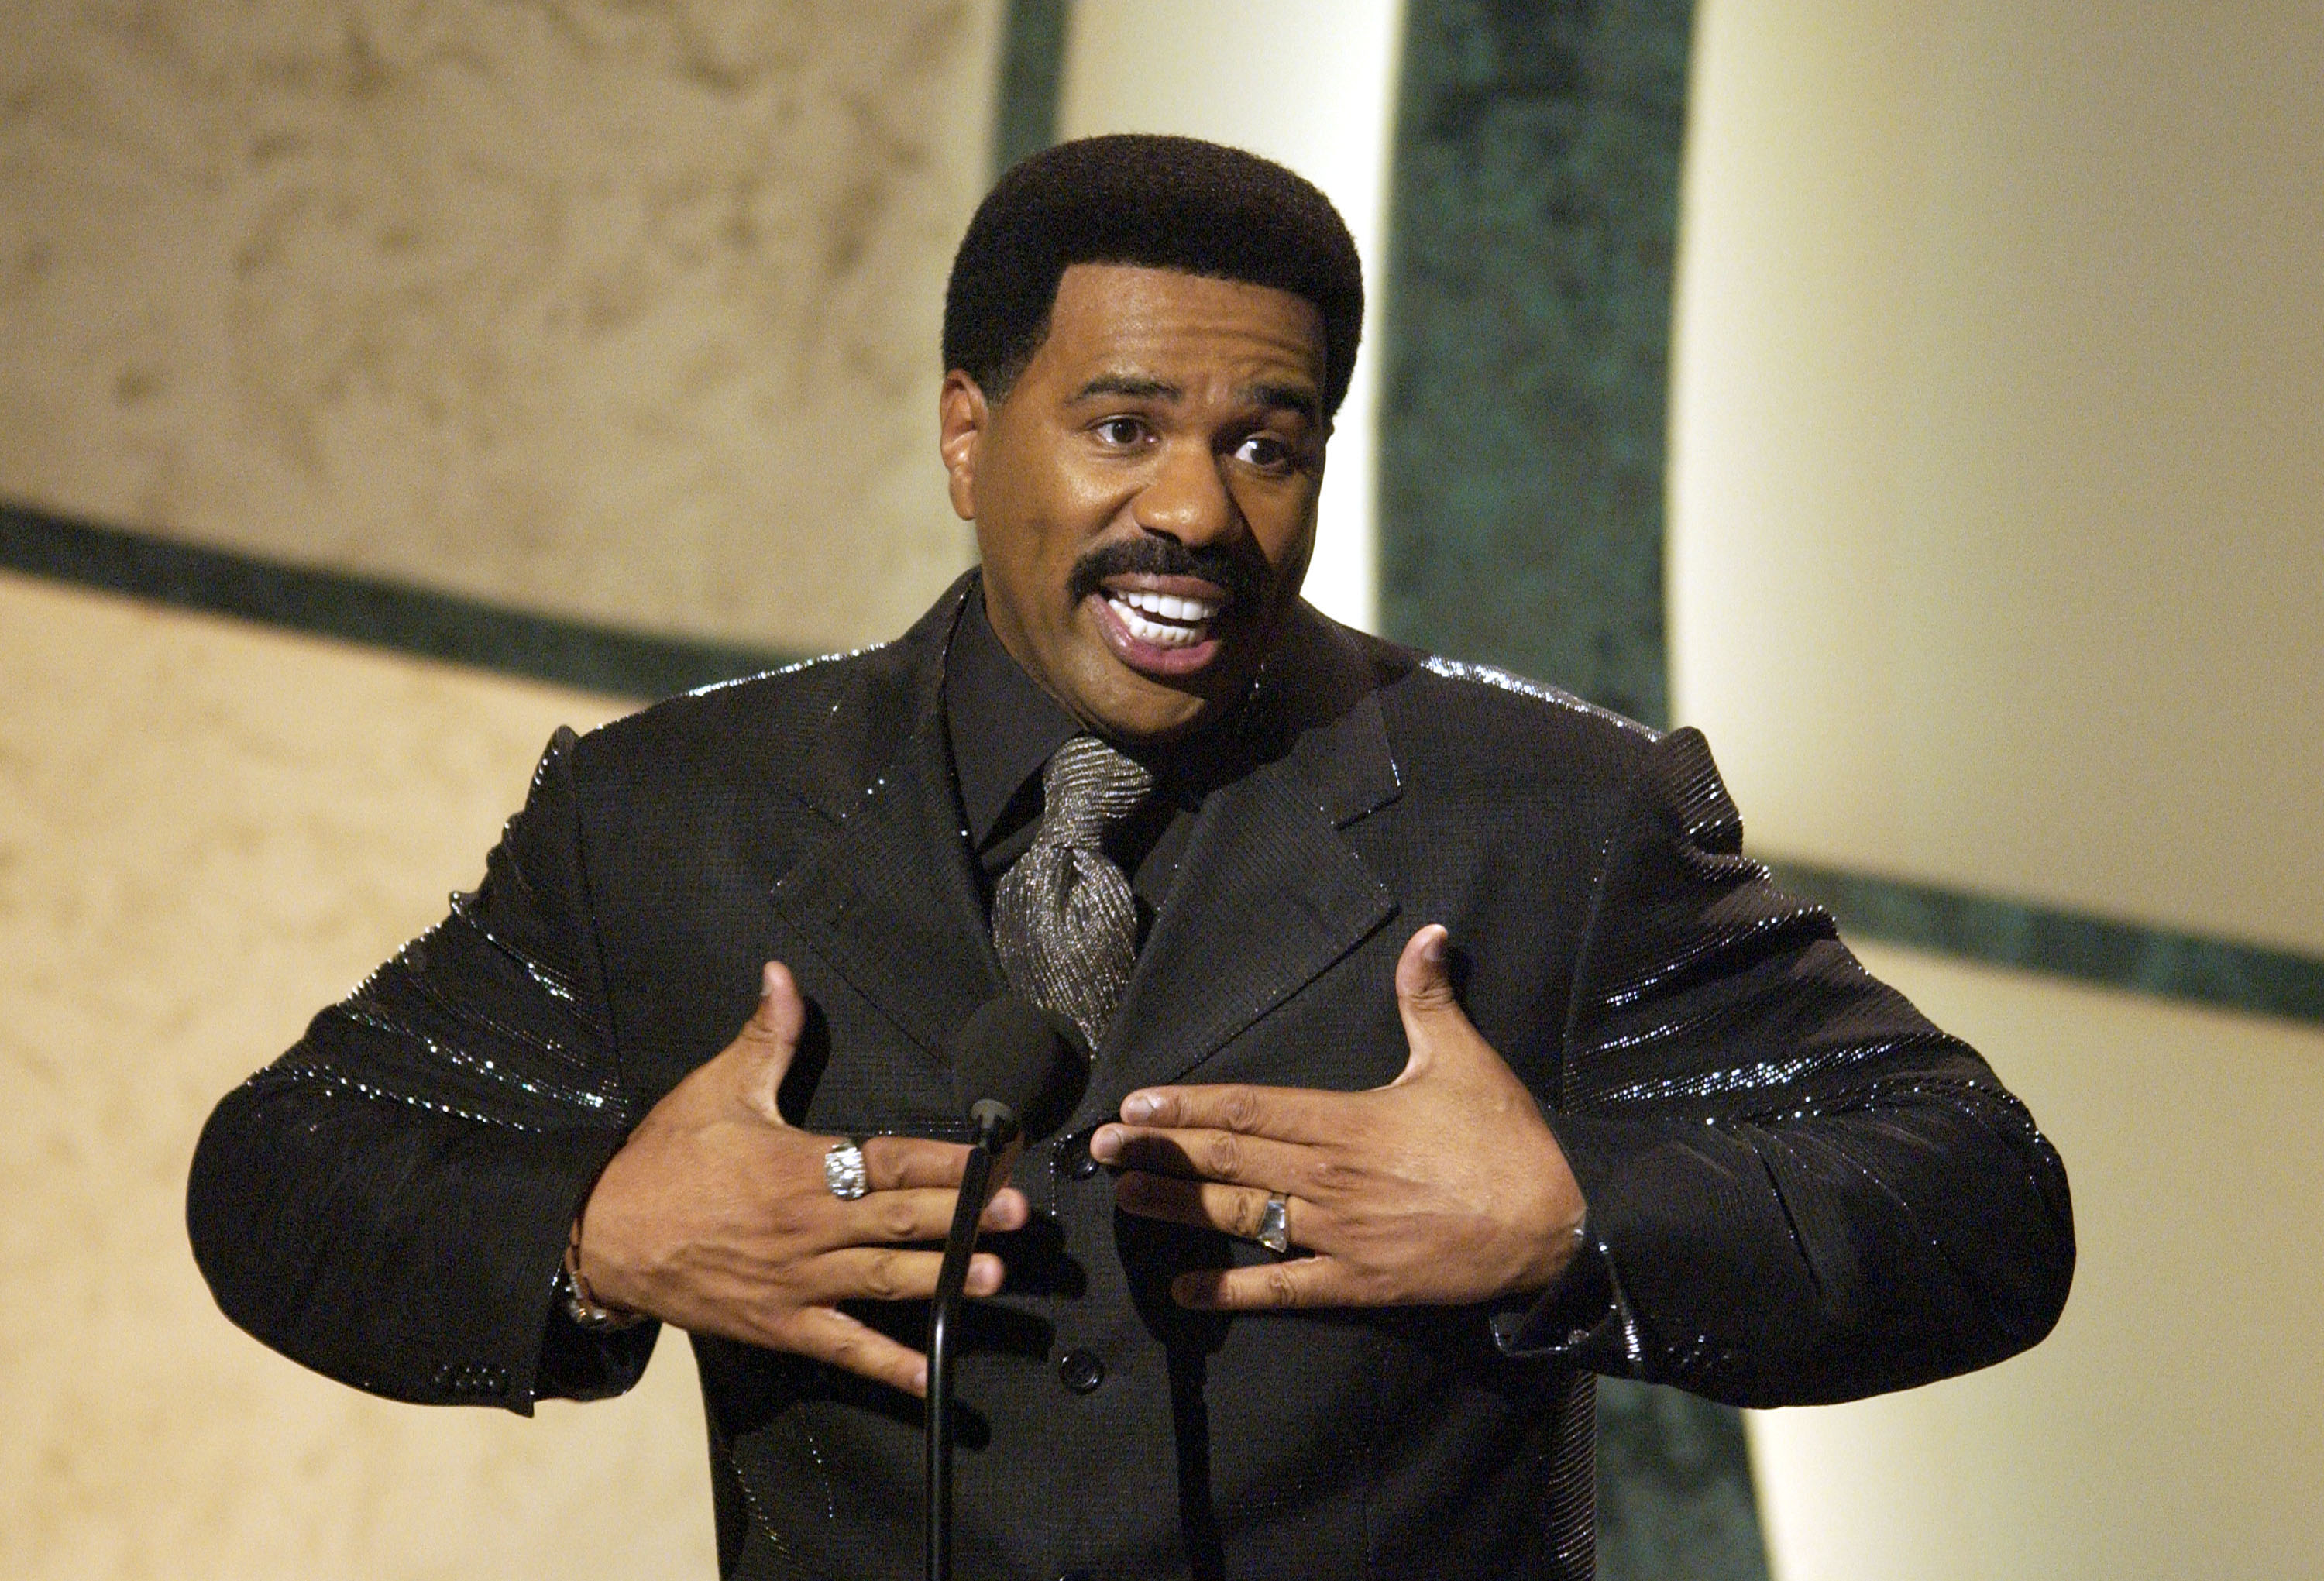 Steve Harvey in Hollywood, California on June 25, 2002 | Source: Getty Images